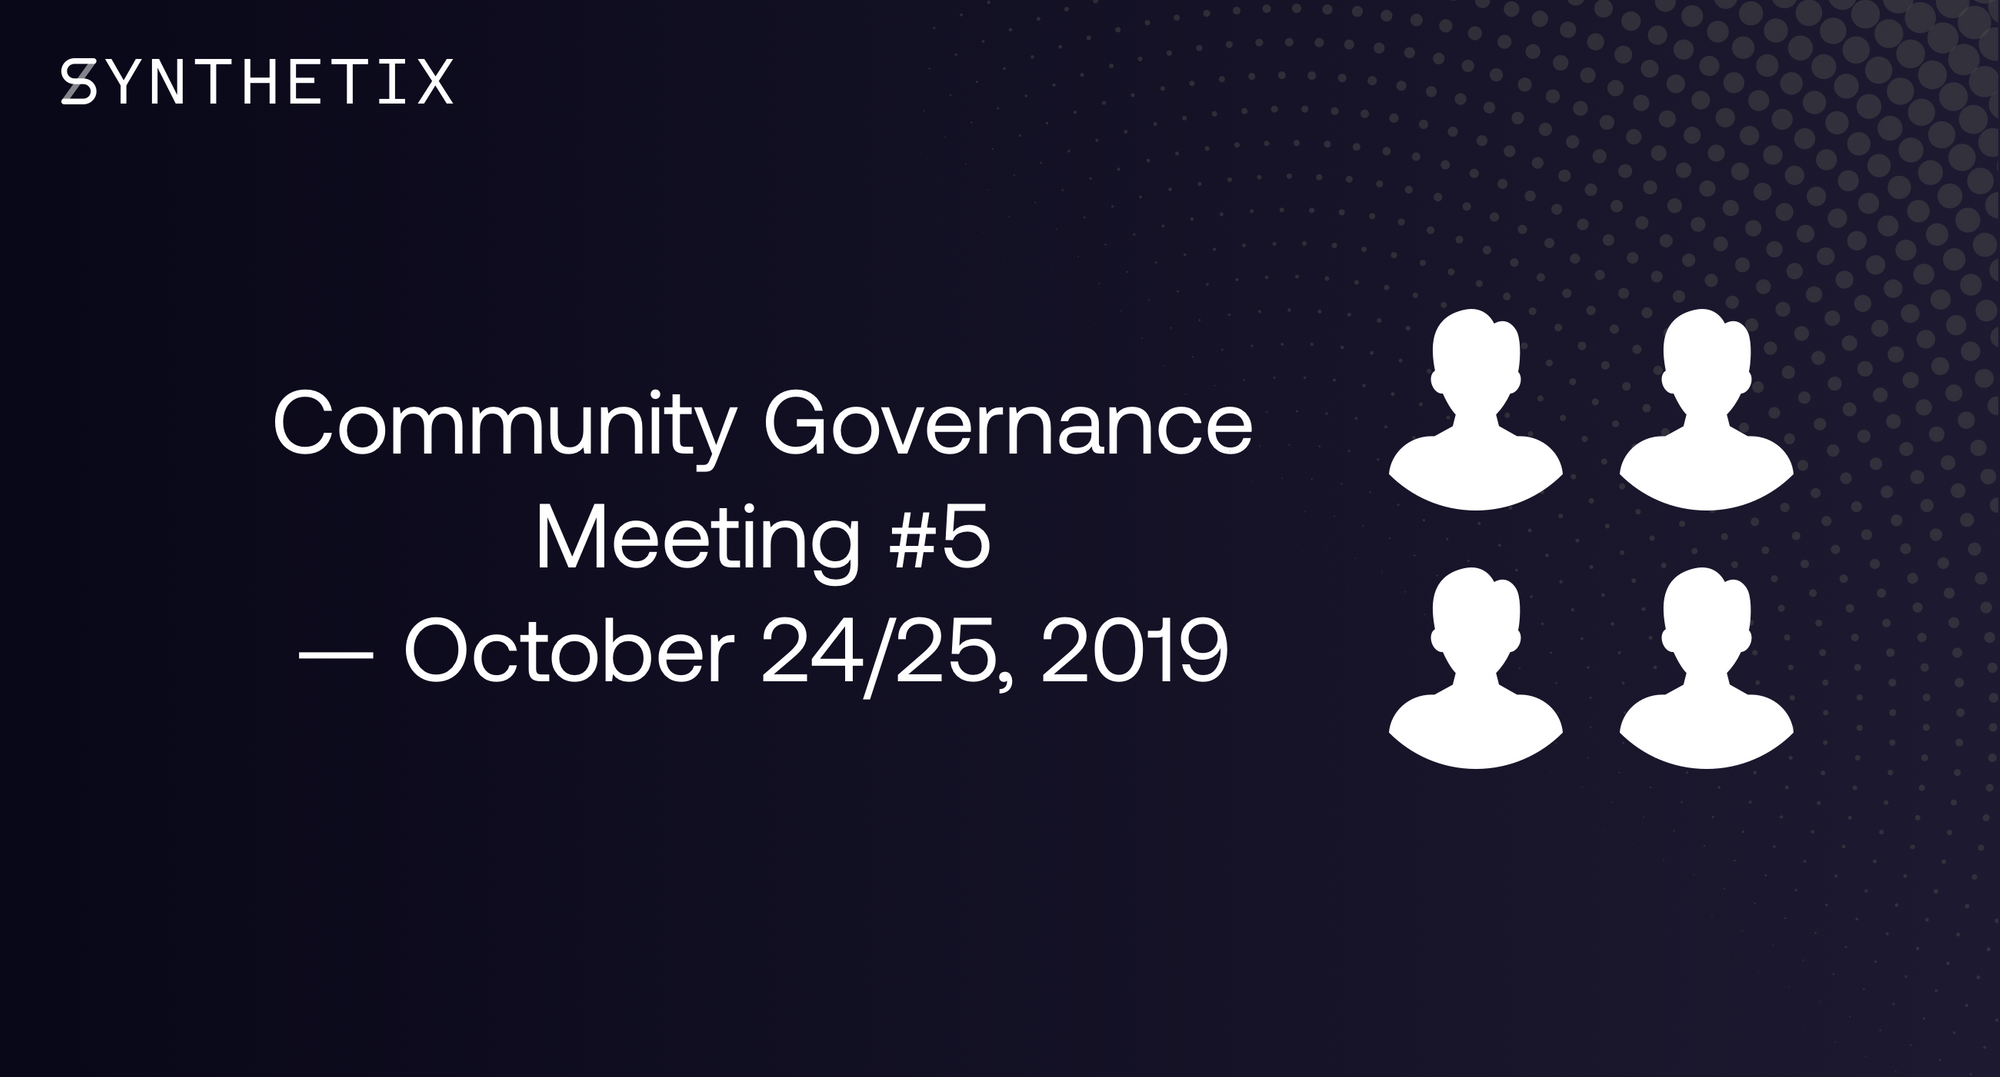 Join us for the next community governance call on October 24/25!